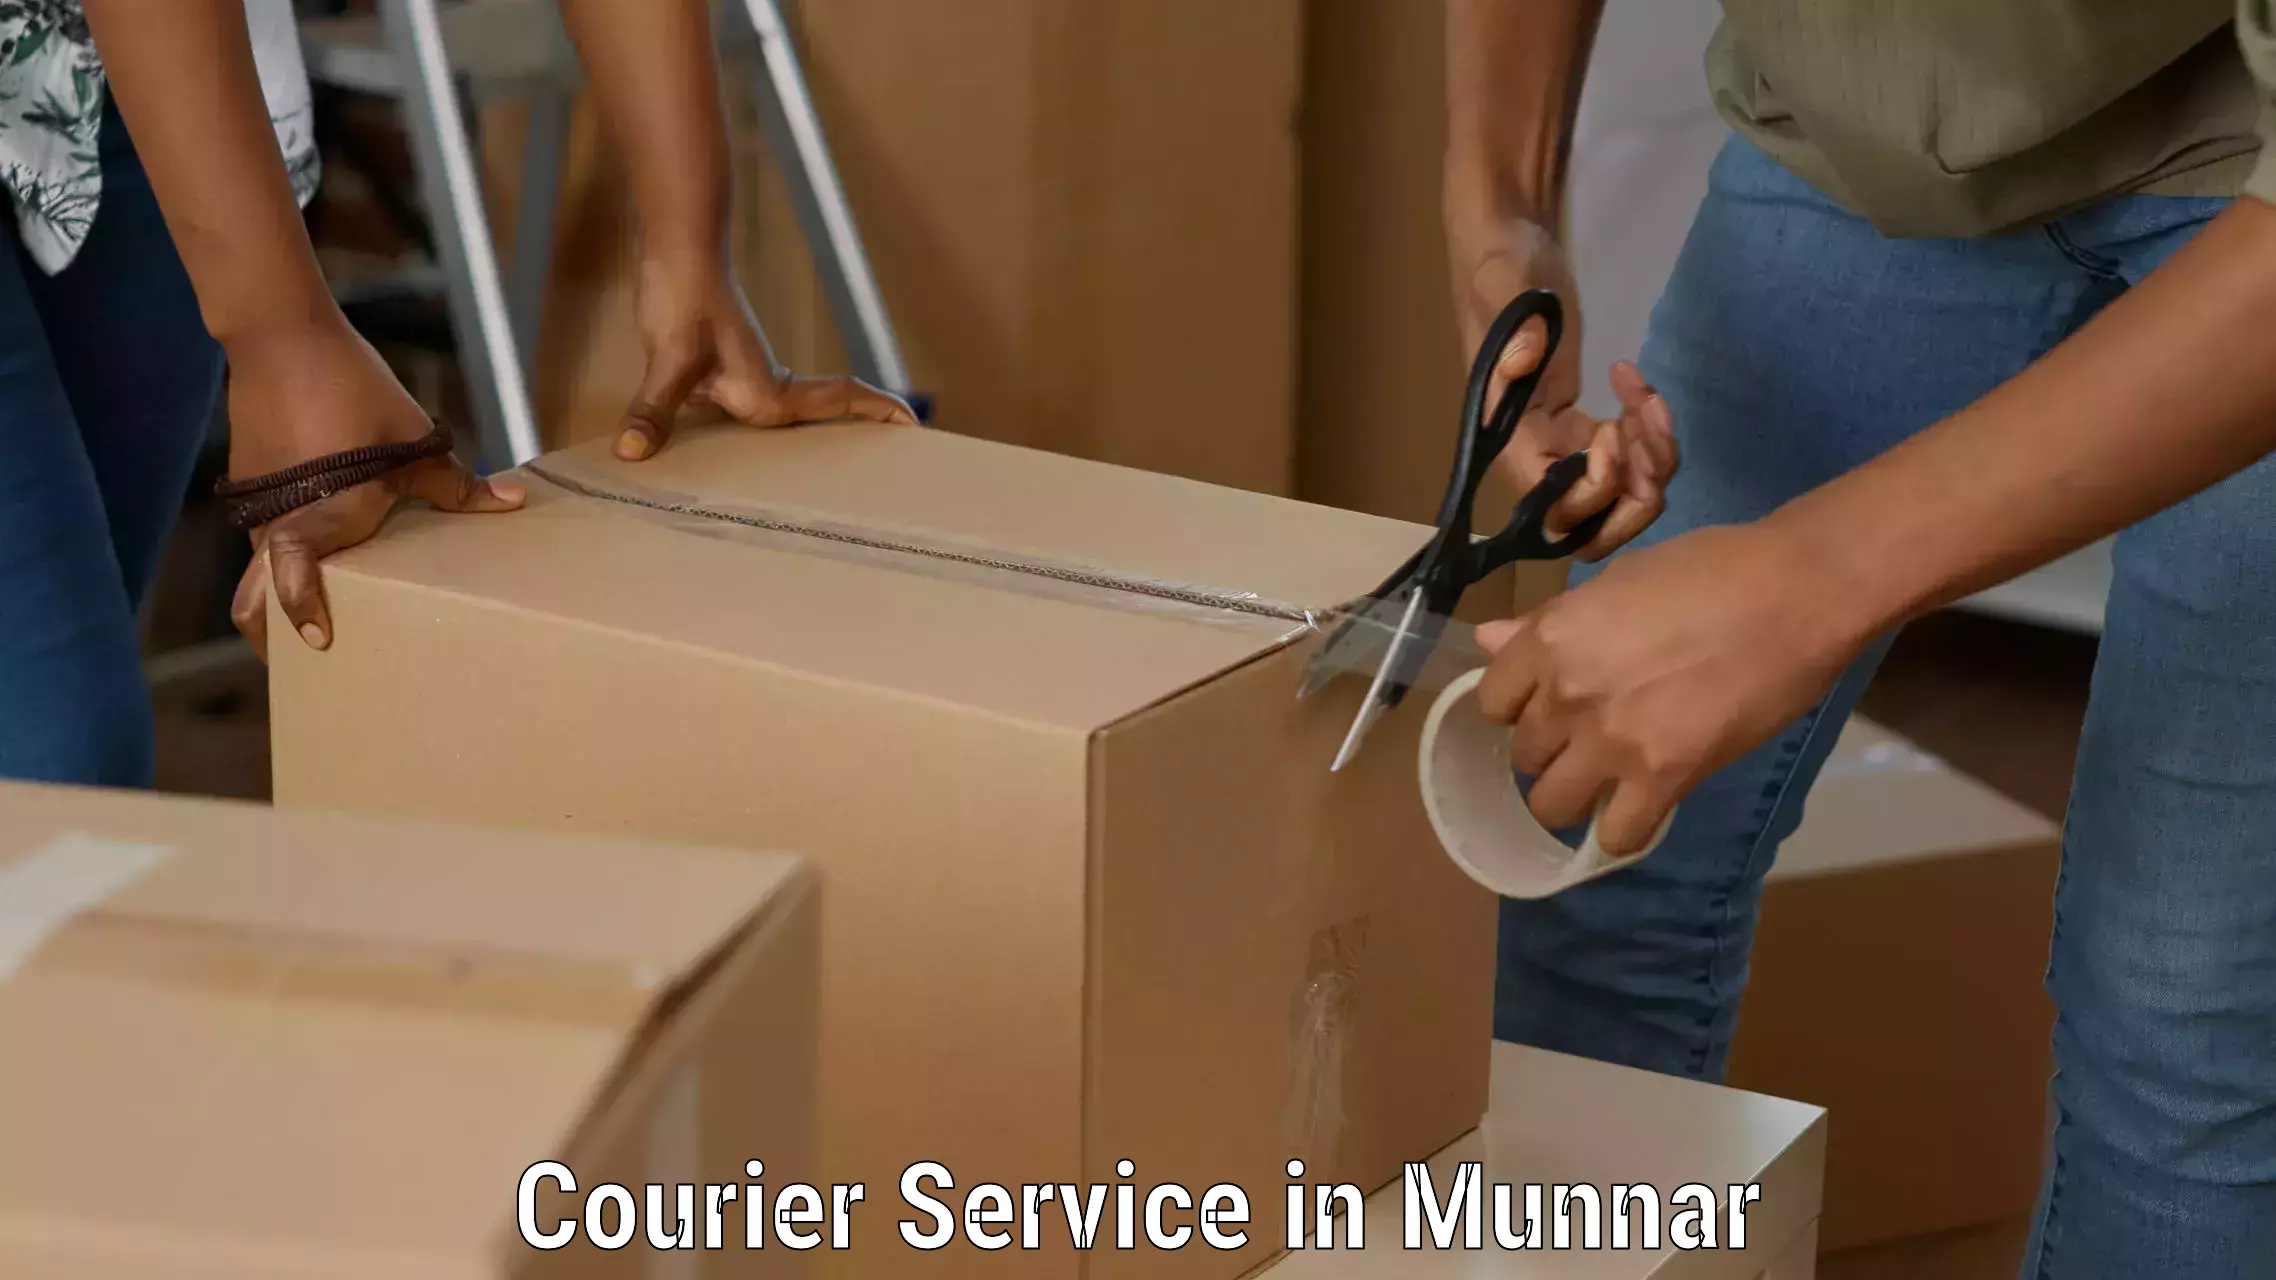 Sustainable courier practices in Munnar